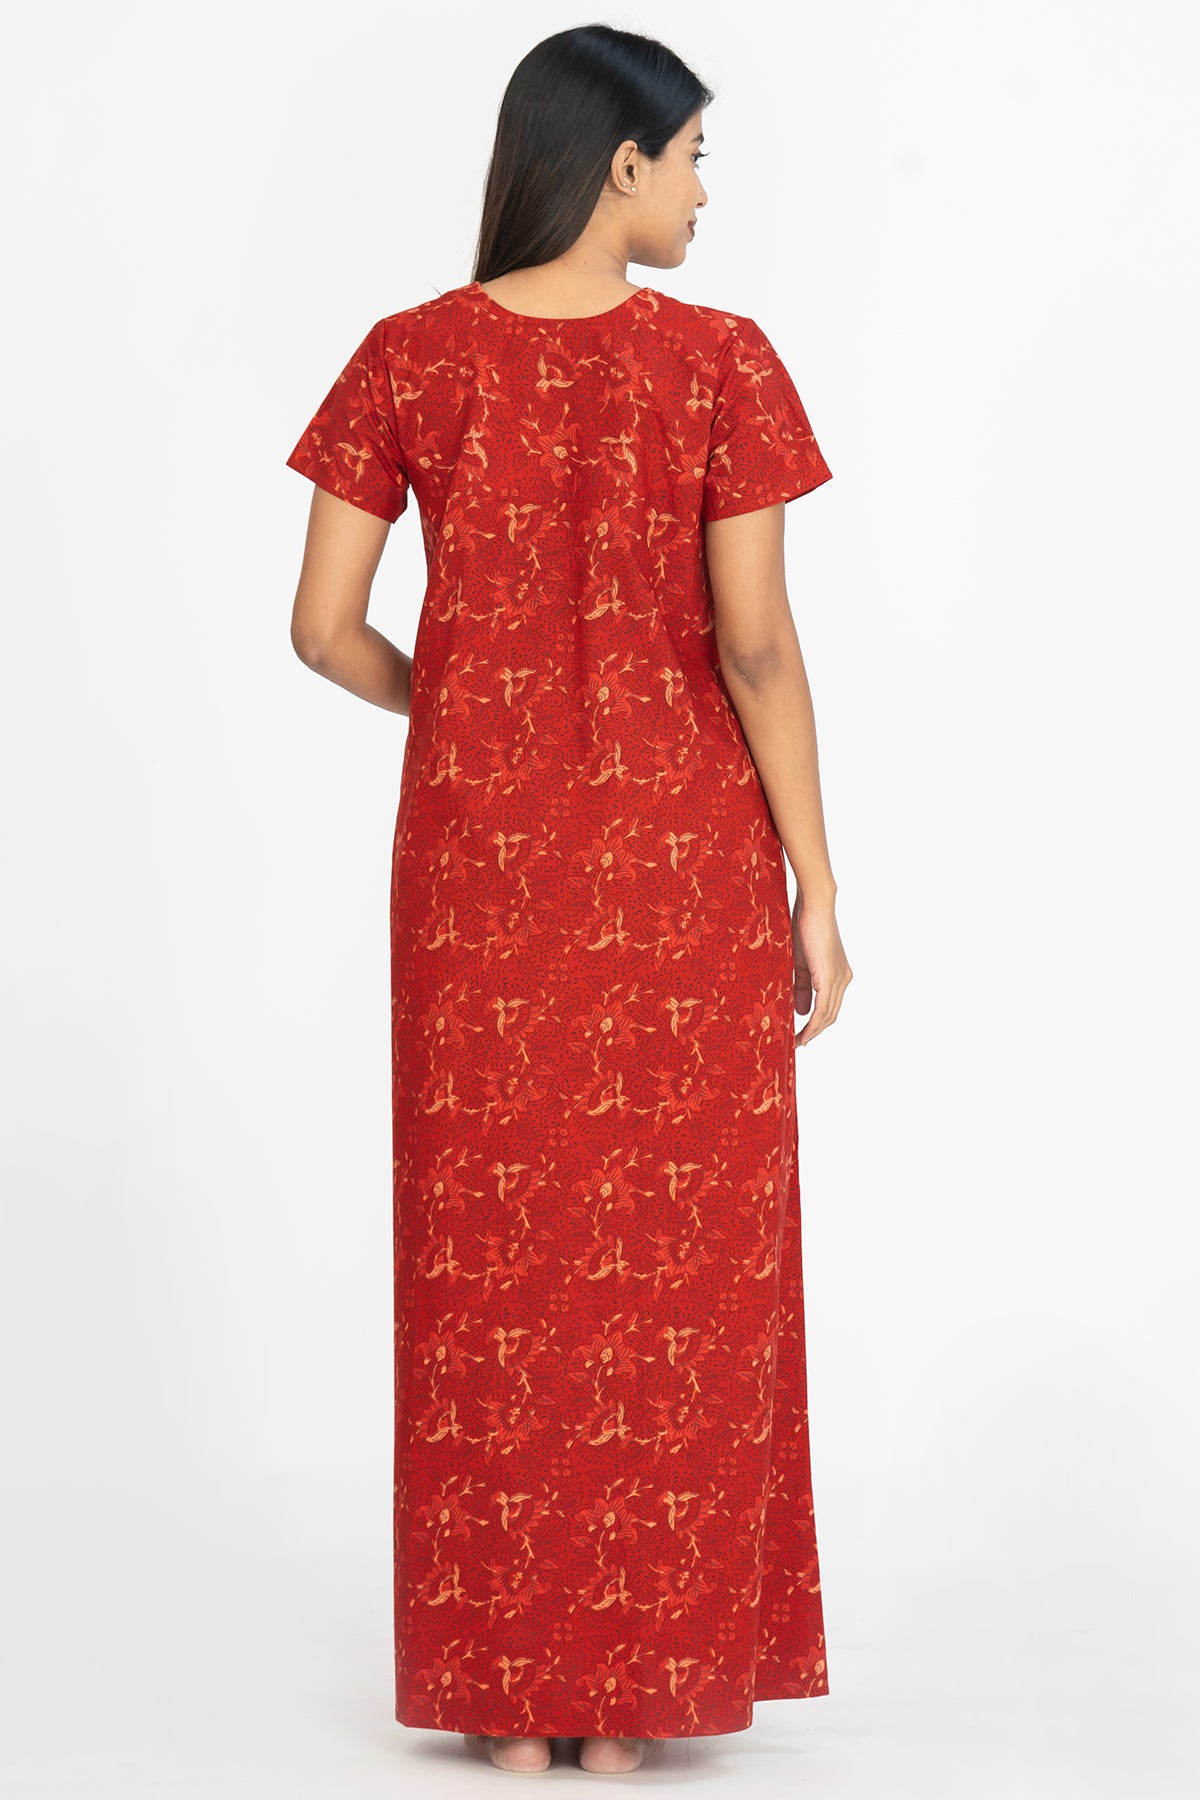 All Over Floral Abstract Printed With Contrast Yoke Nighty - Red